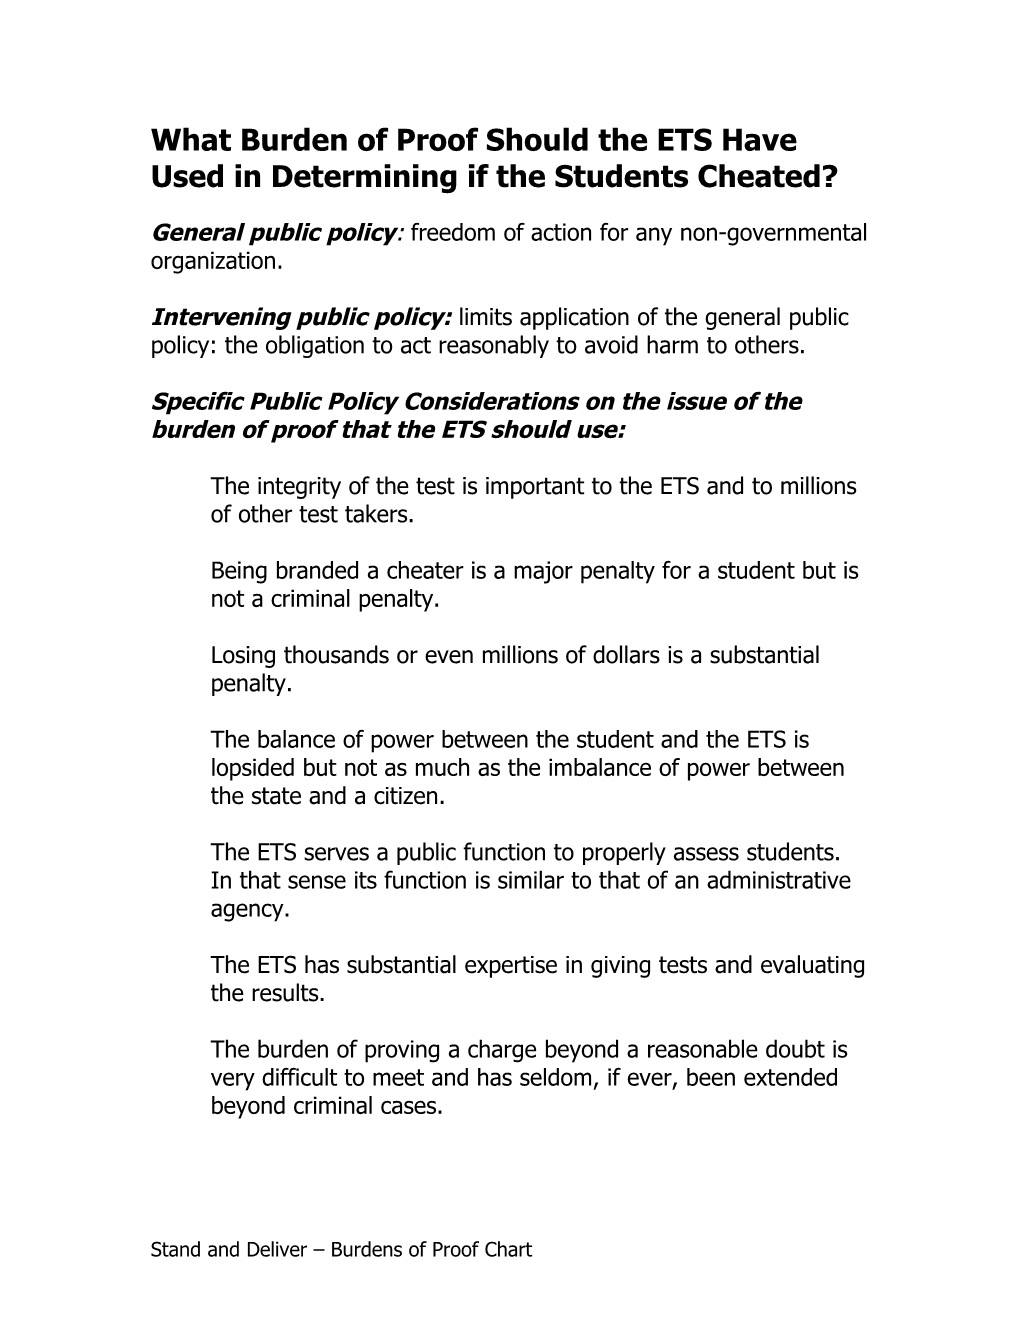 What Burden of Proof Should the ETS Have Used in Determining If the Students Cheated